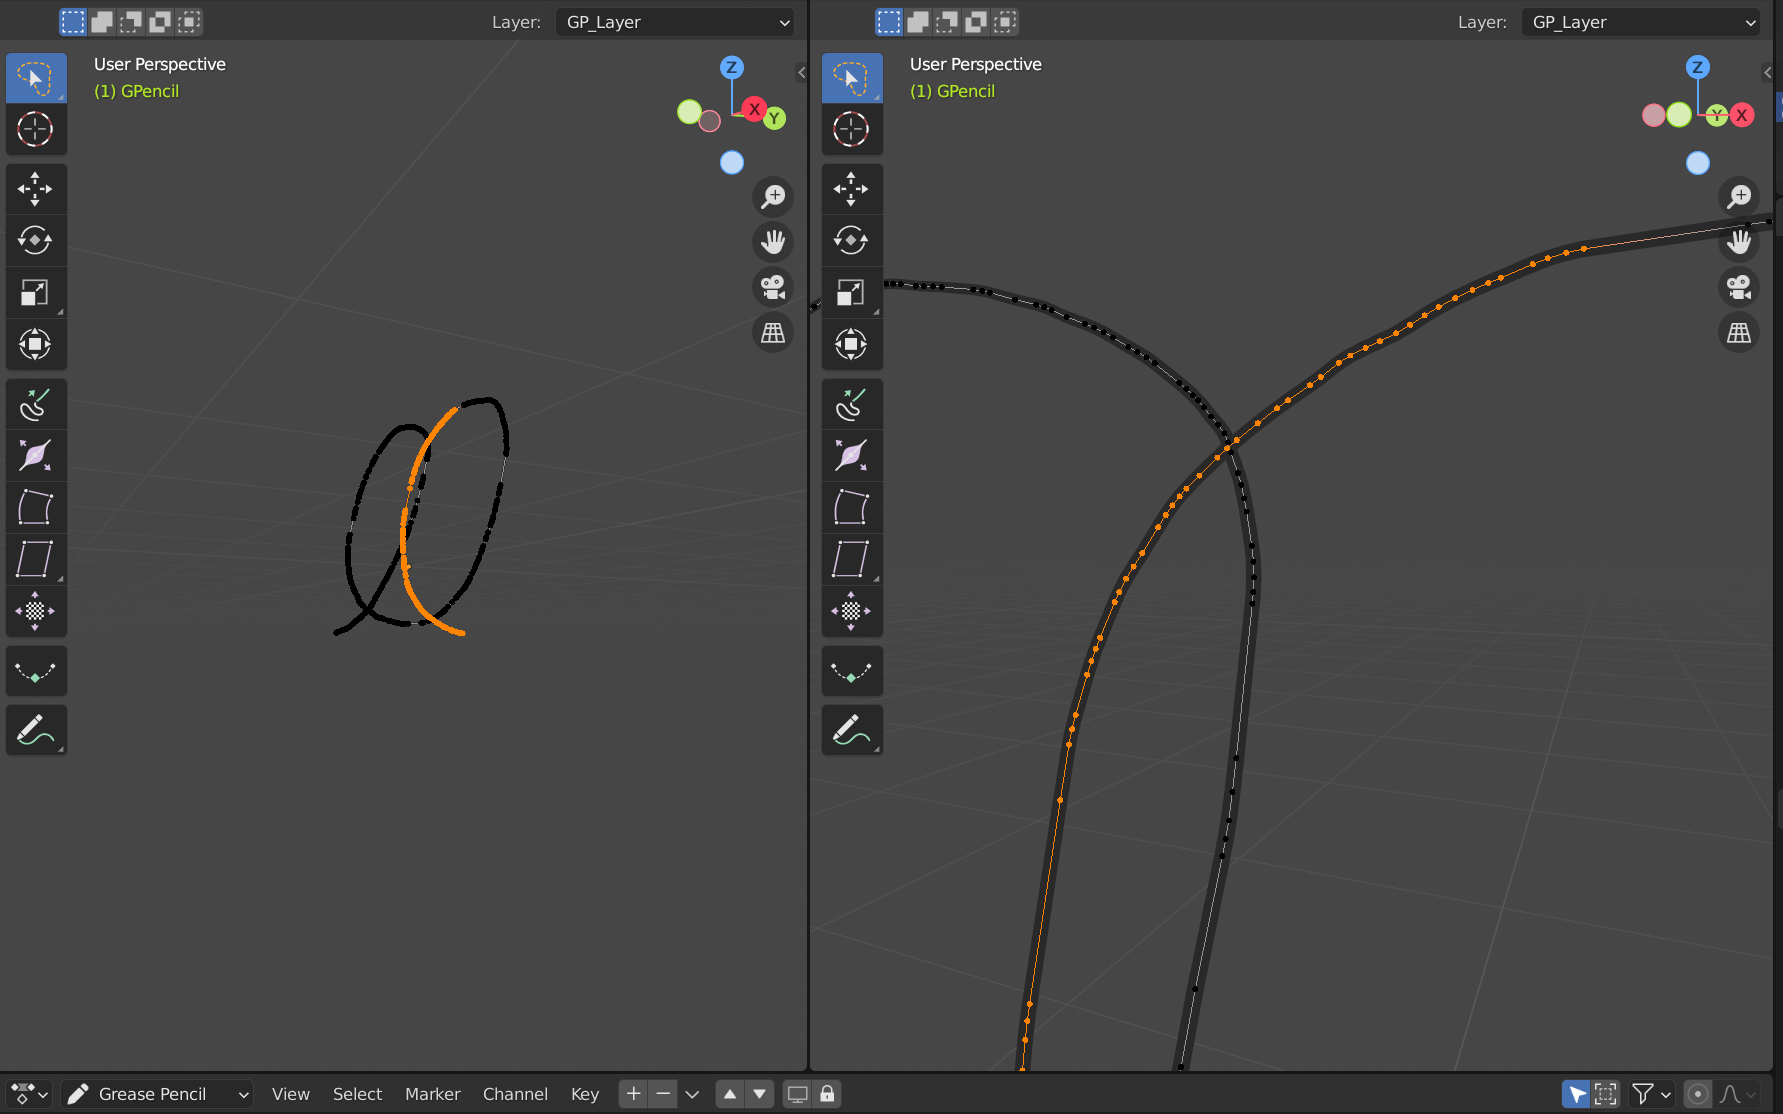 Our Blender Grease Pencil mesh in Edit Mode.